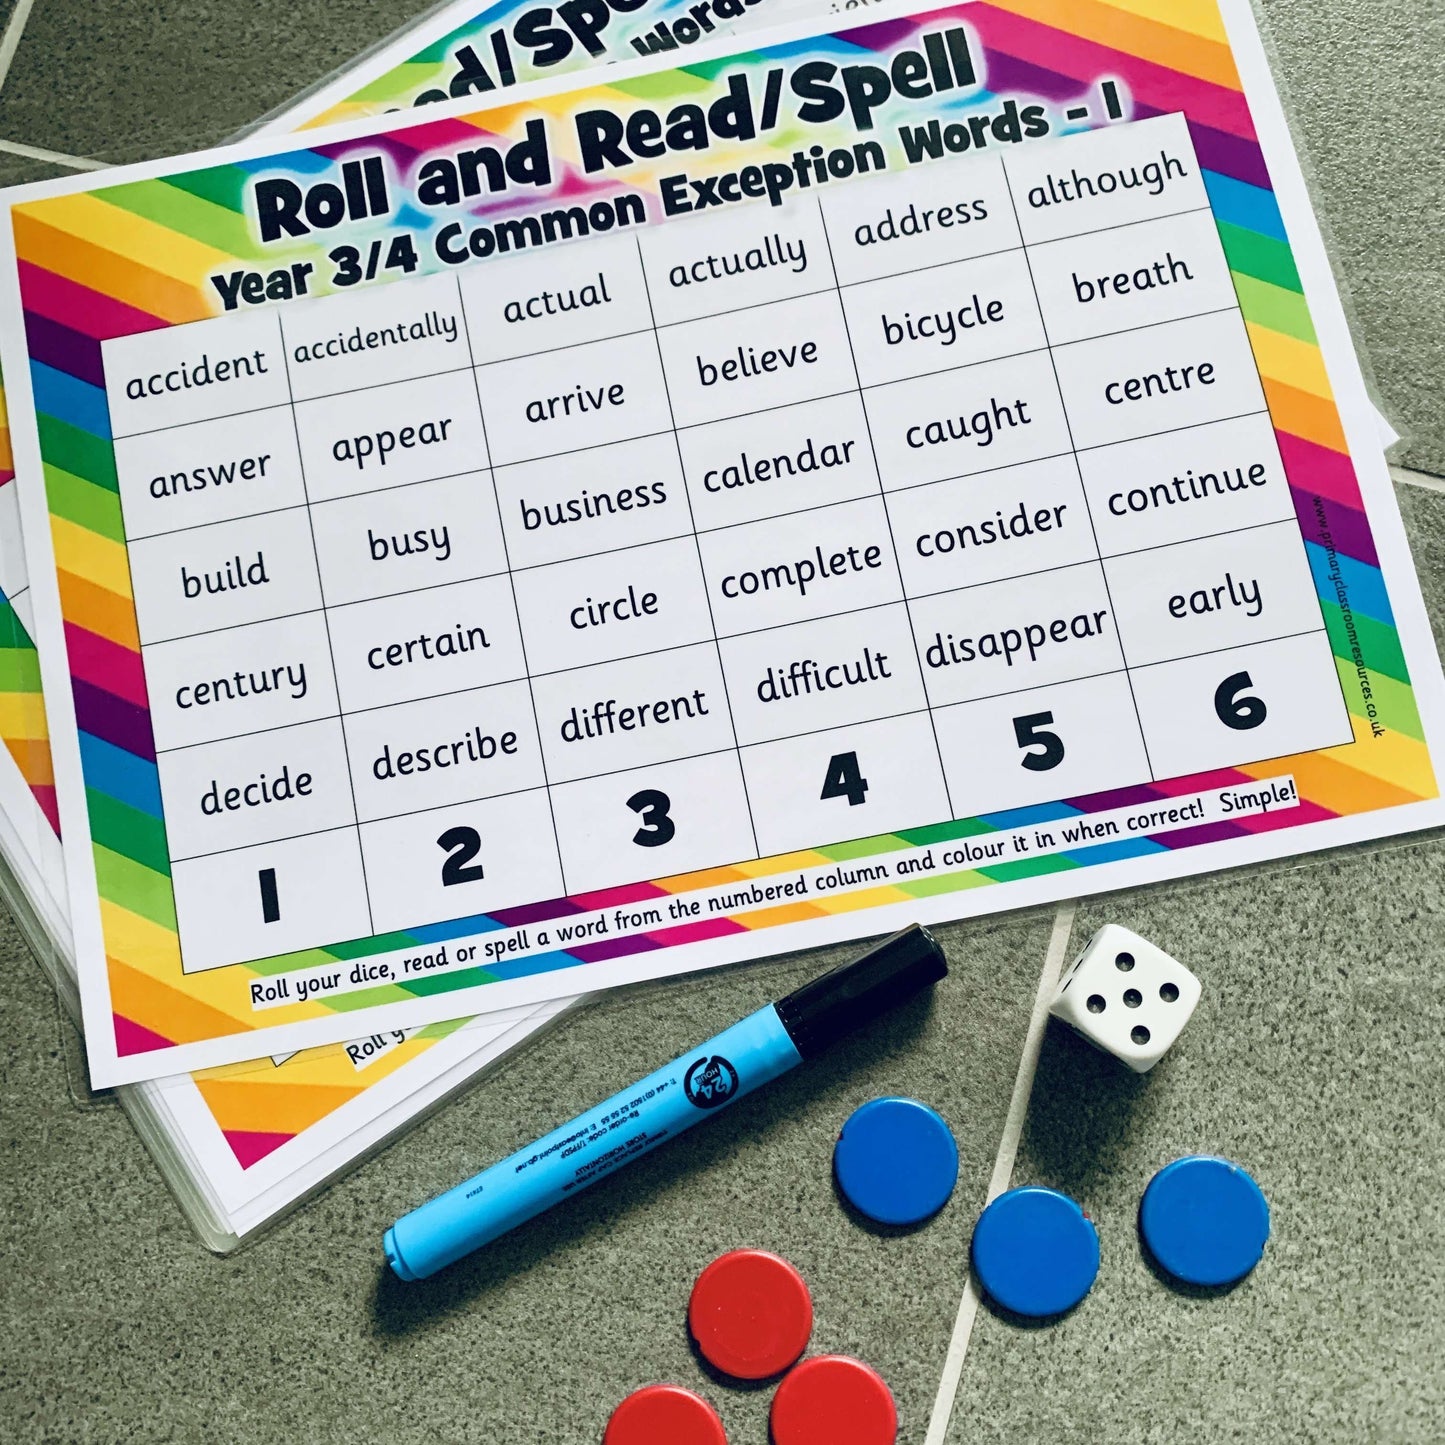 Roll and Read/Spell - Year 3 & 4 Common Exception Words:Primary Classroom Resources